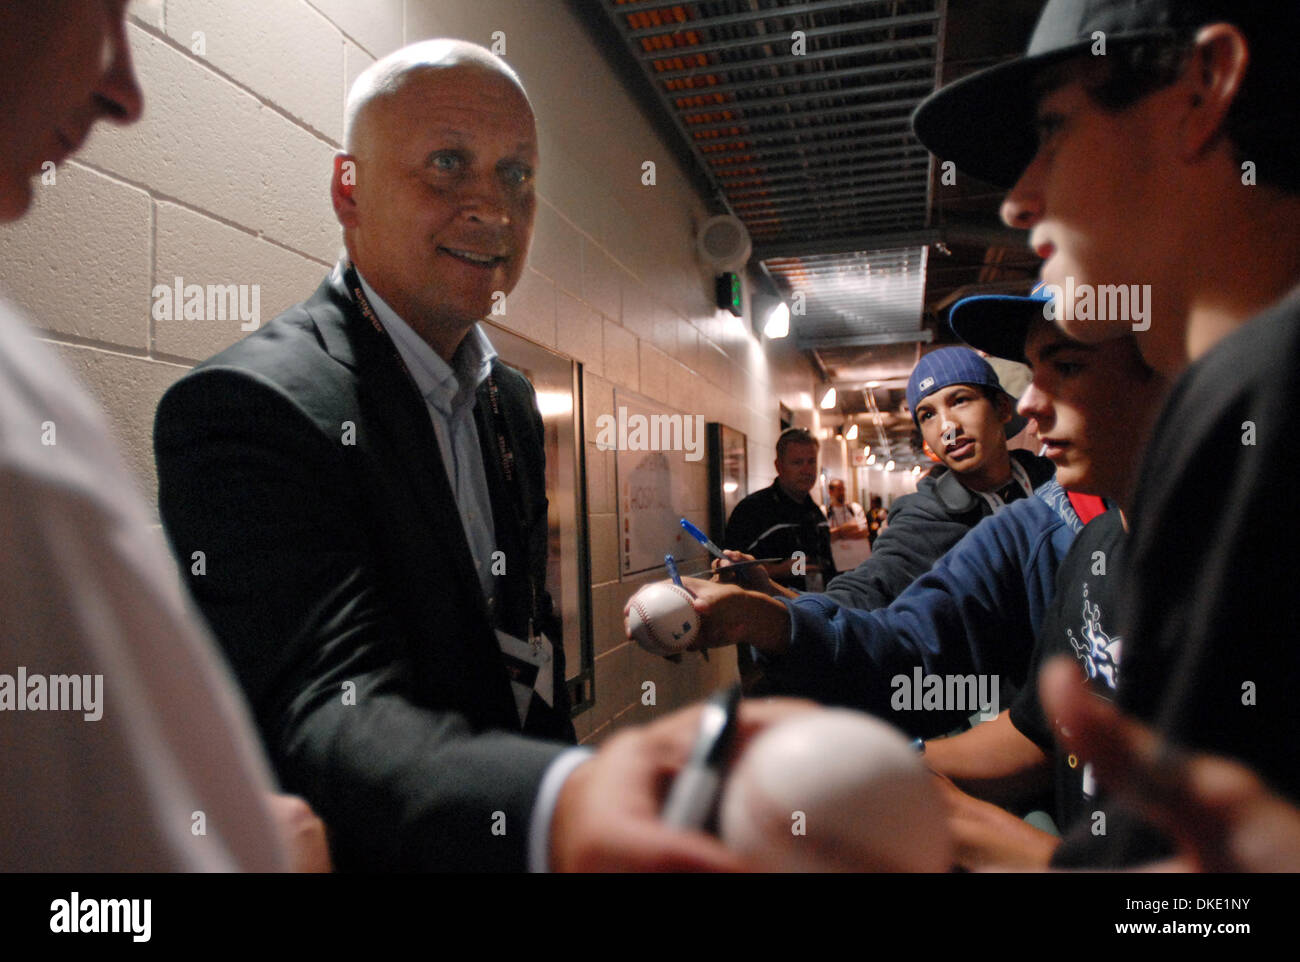 July 10th, 2007 - San Francisco, CA, USA - Former Baltimore Oriole pitcher and 2007 Hall of Famer, Cal Ripken Jr. signs autographs before the start of the 2007 MLB All-Star game at AT&T Park in San Francisco, Calif. on Tuesday July 10, 2007. (Credit Image: © Jose Carlos Fajardo/Contra Costa Times/ZUMA Press) Stock Photo